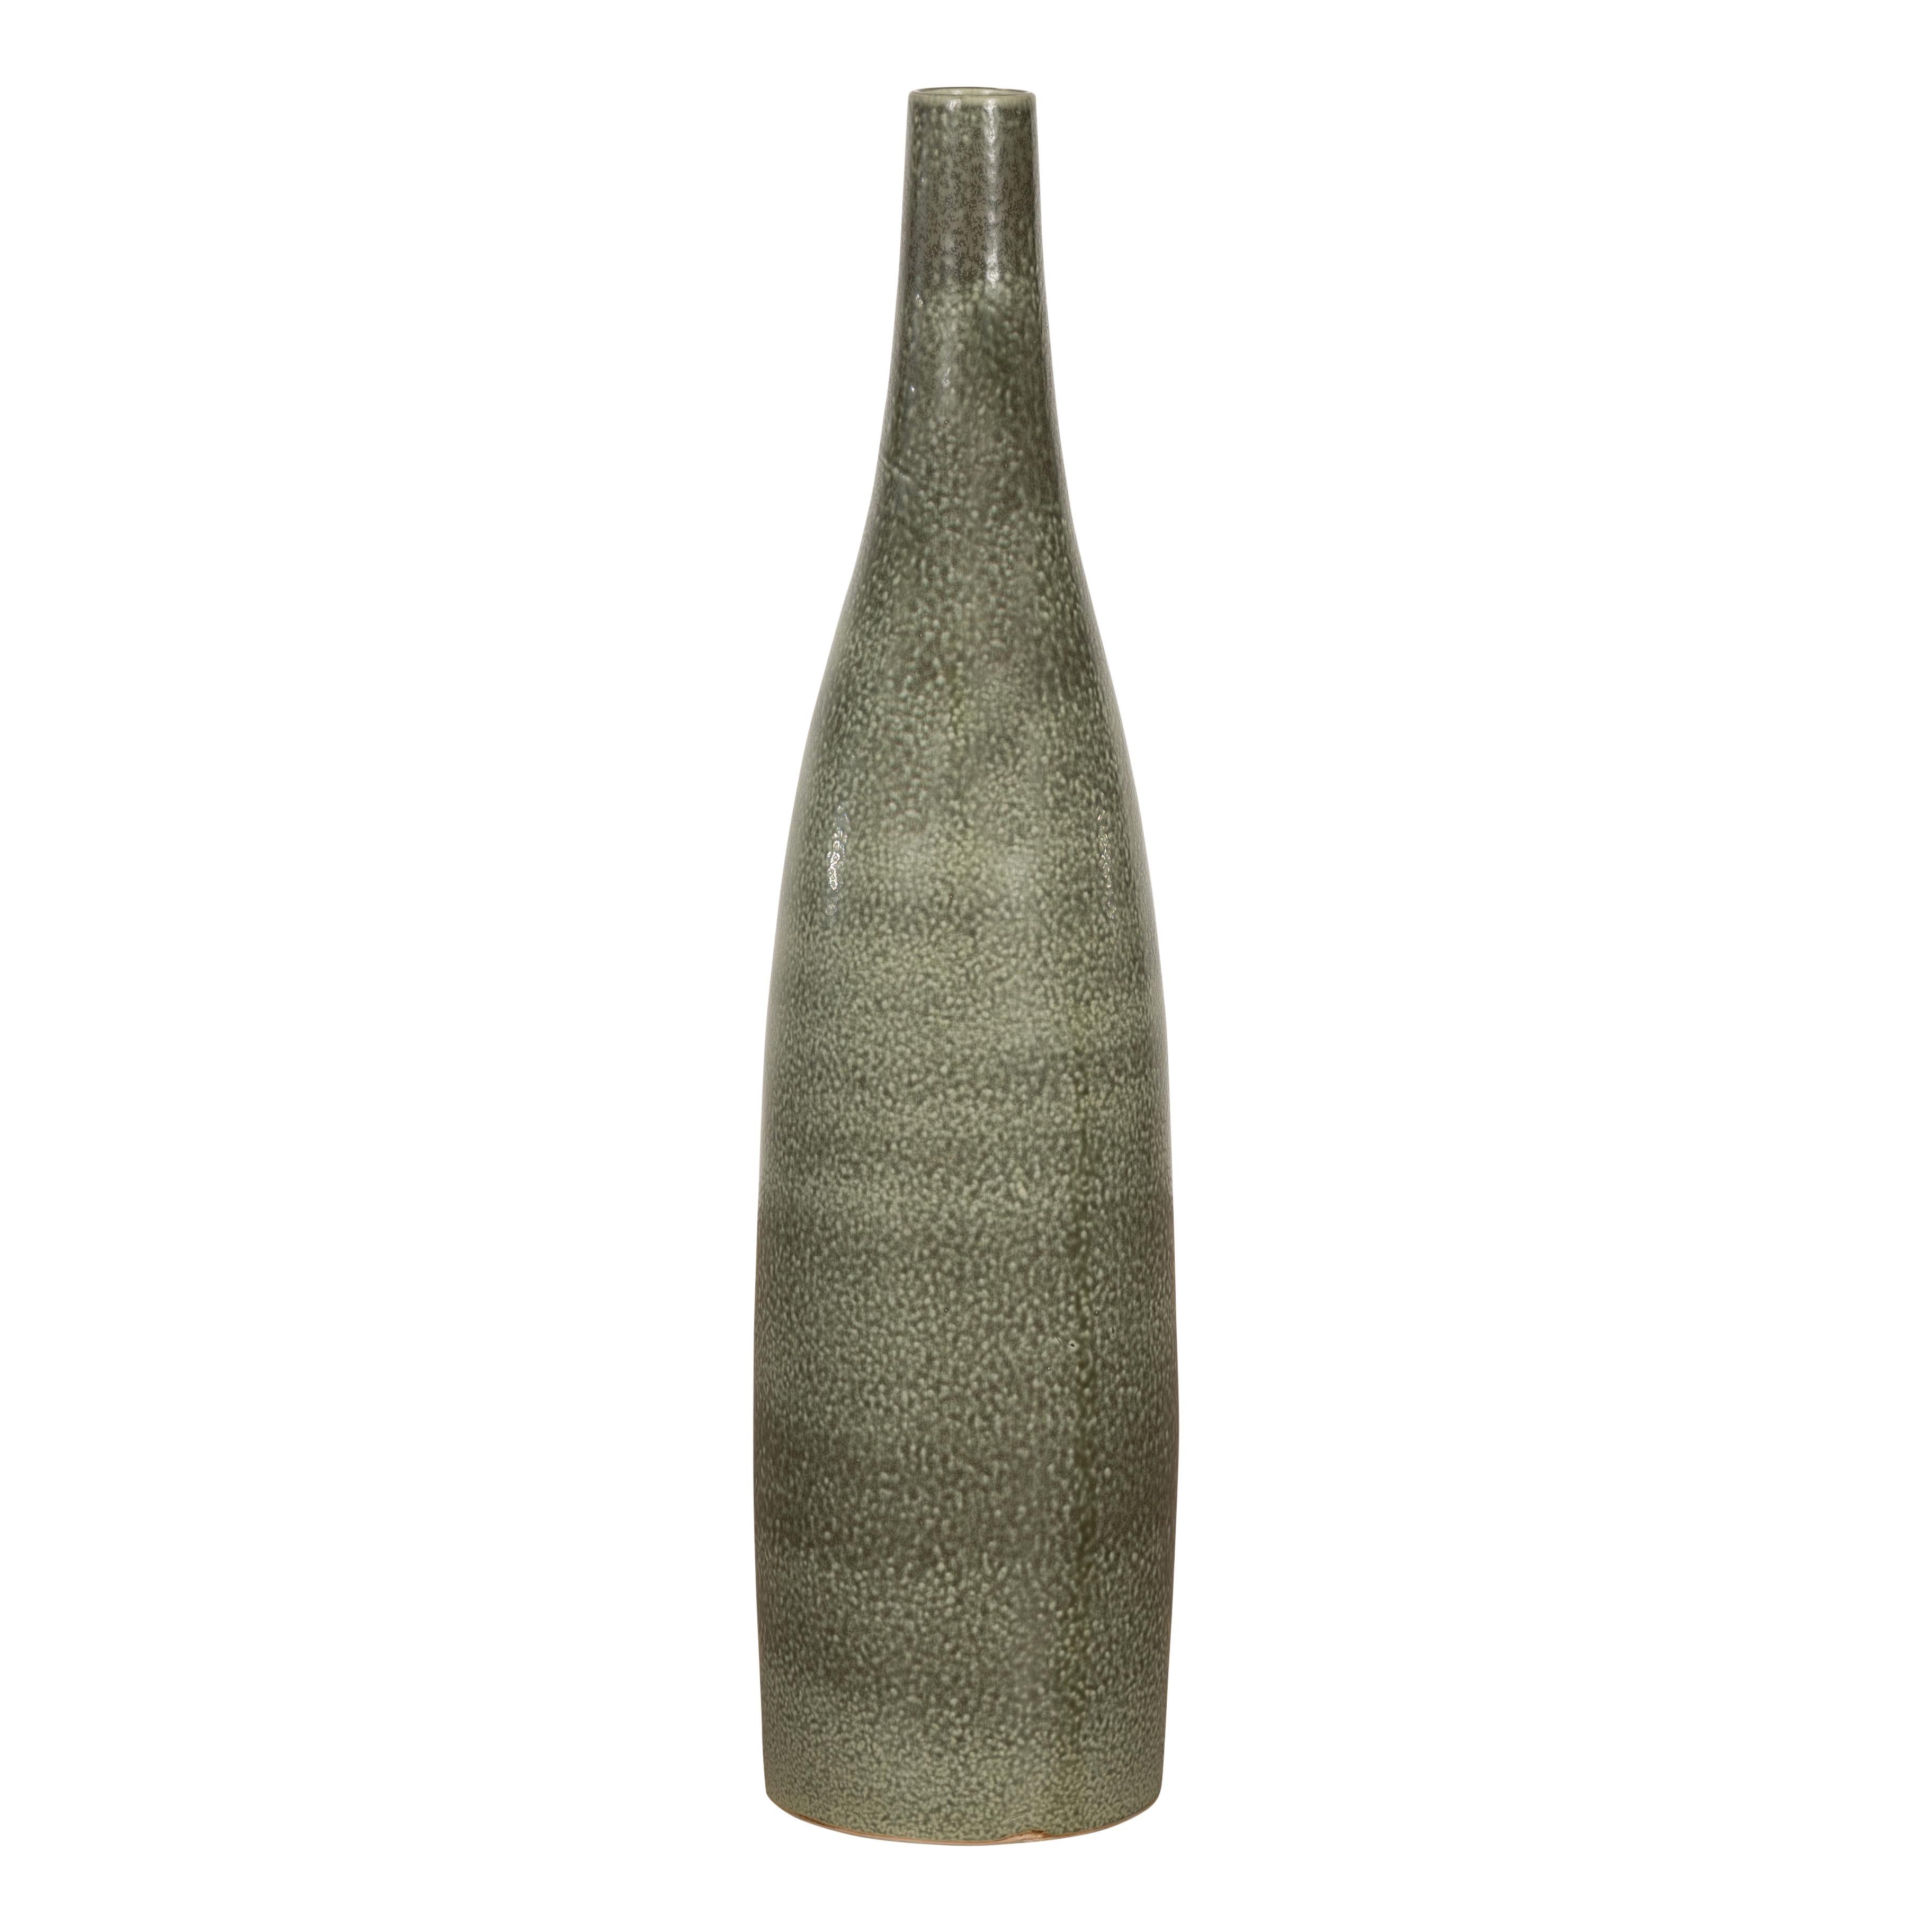 Prem Collection Green Glazed Vase with Green Finish and Blotched Accents